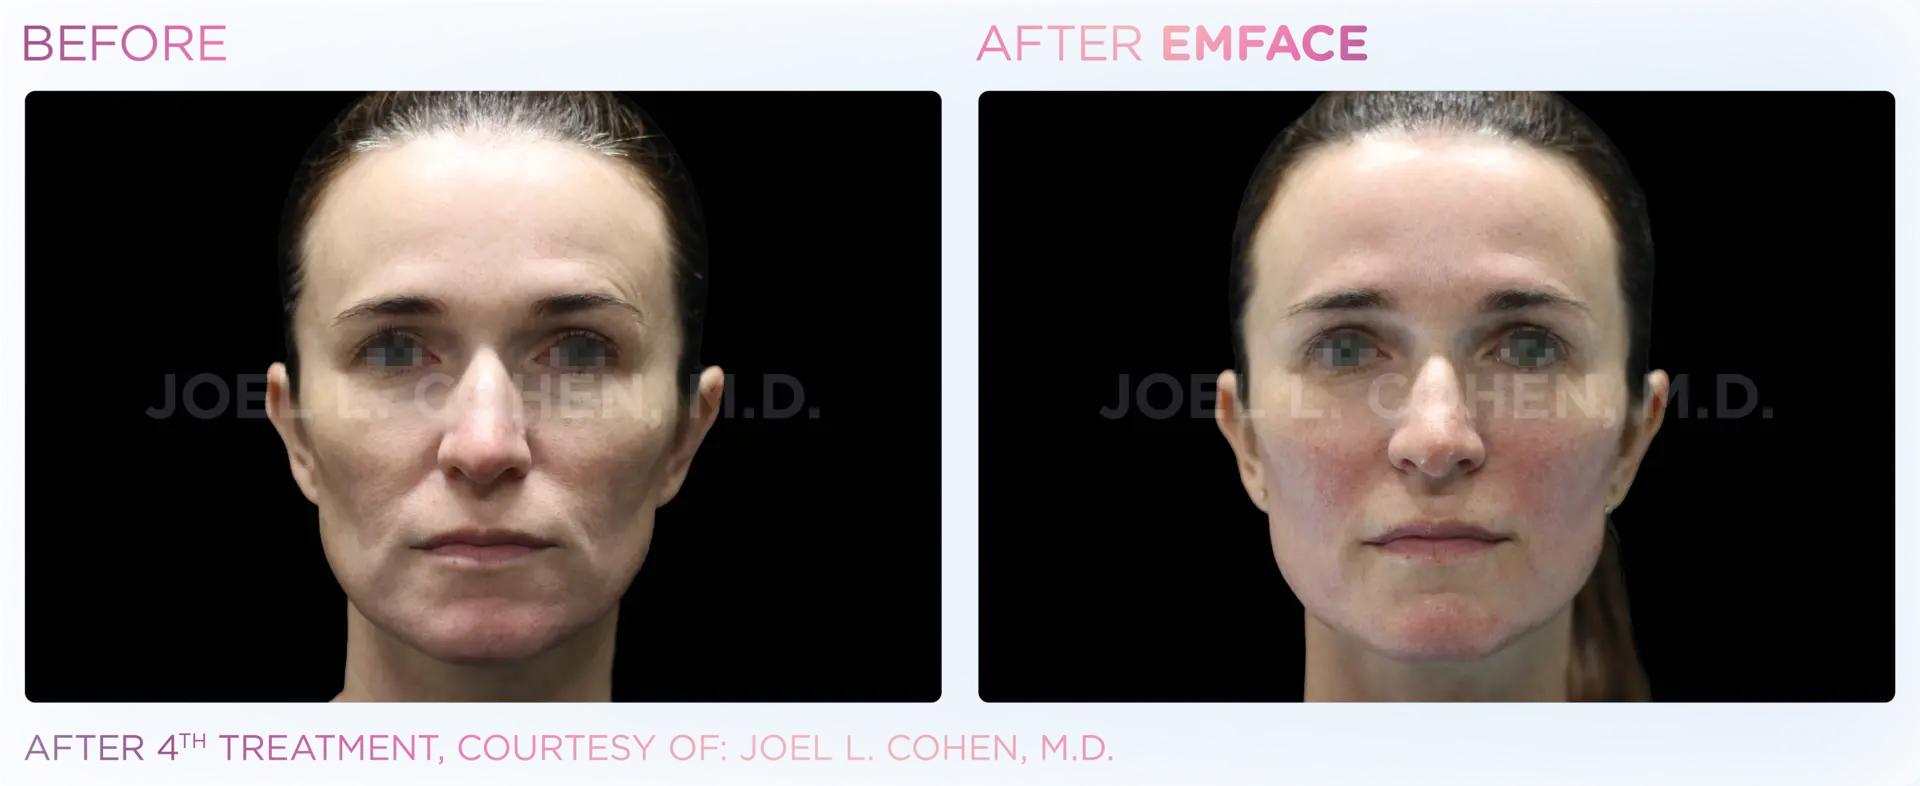 EMFACE Full Face - Before and After